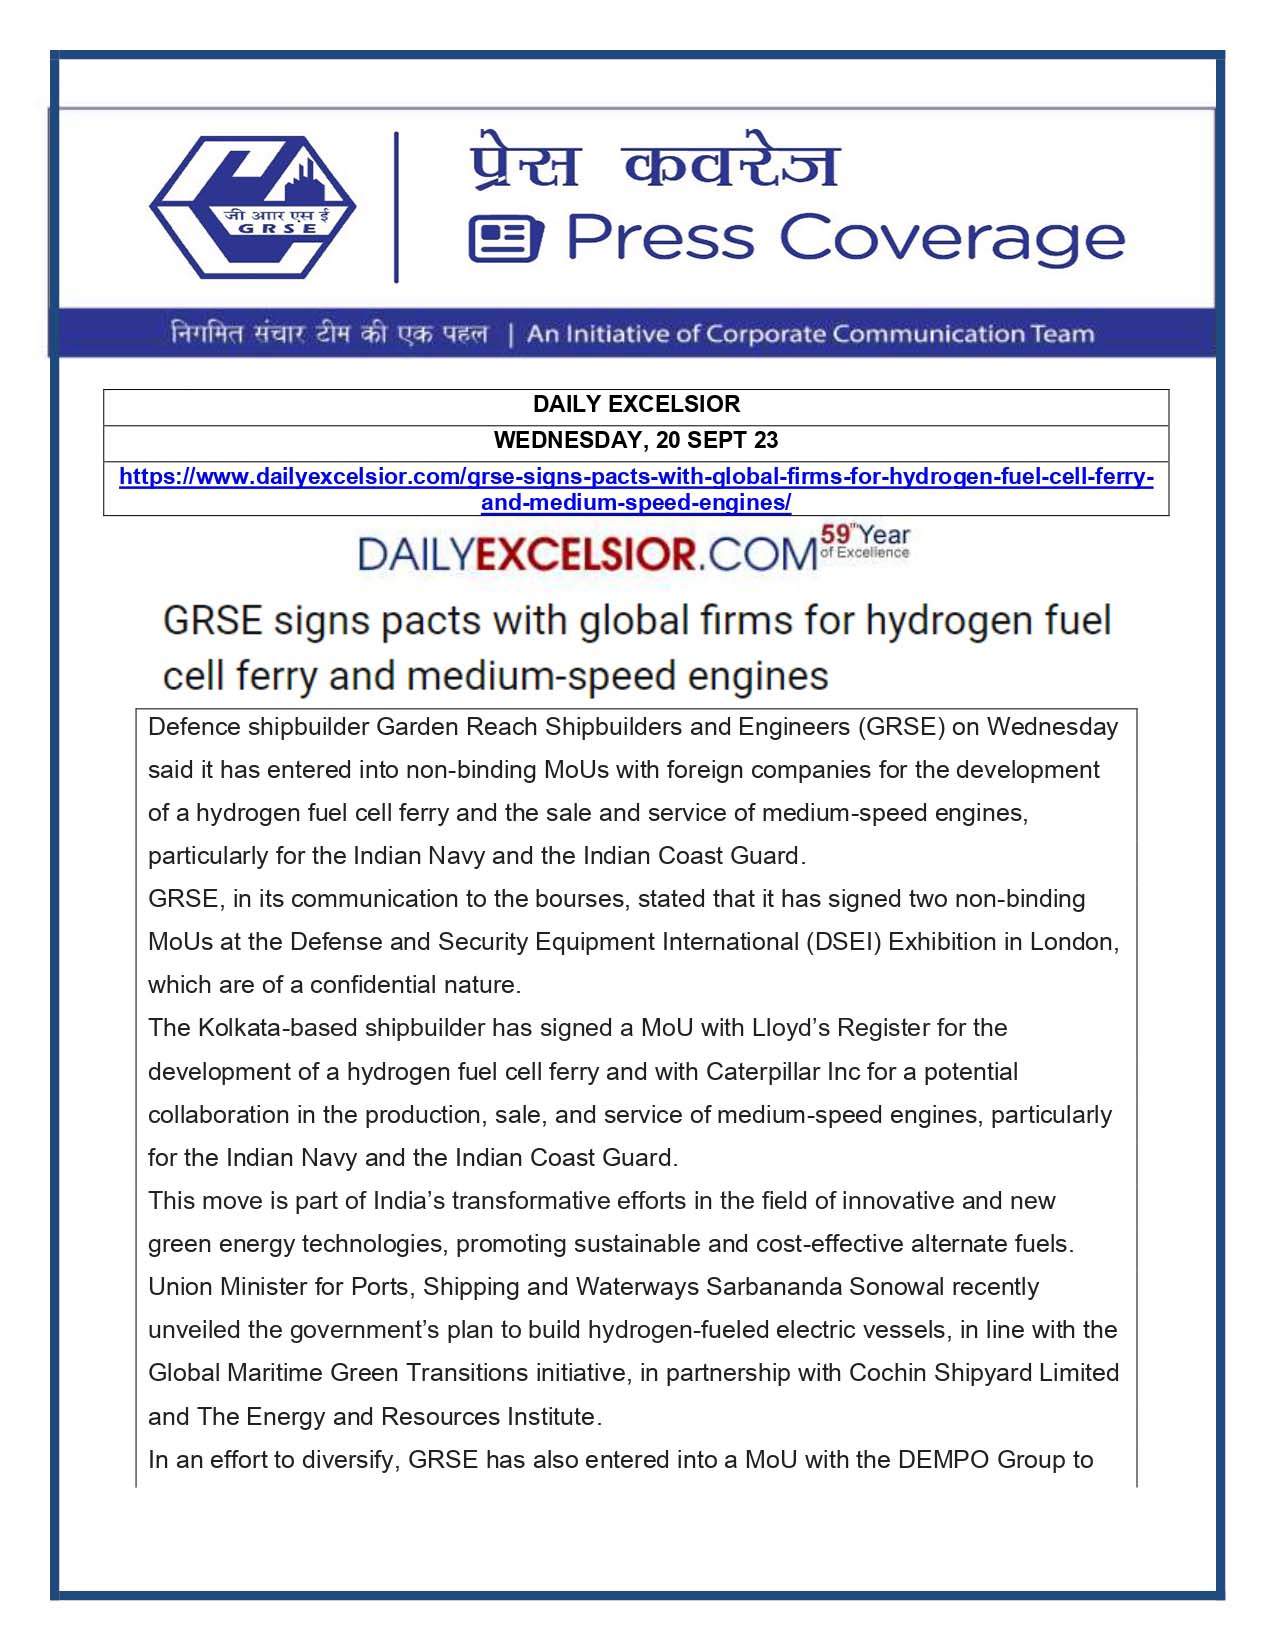 Press Coverage : Daily Excelsior, 20 Sep 23 : GRSE signs pact with Global firms for Hydrogen Fuel Cell Ferry and Medium-Speed Engines